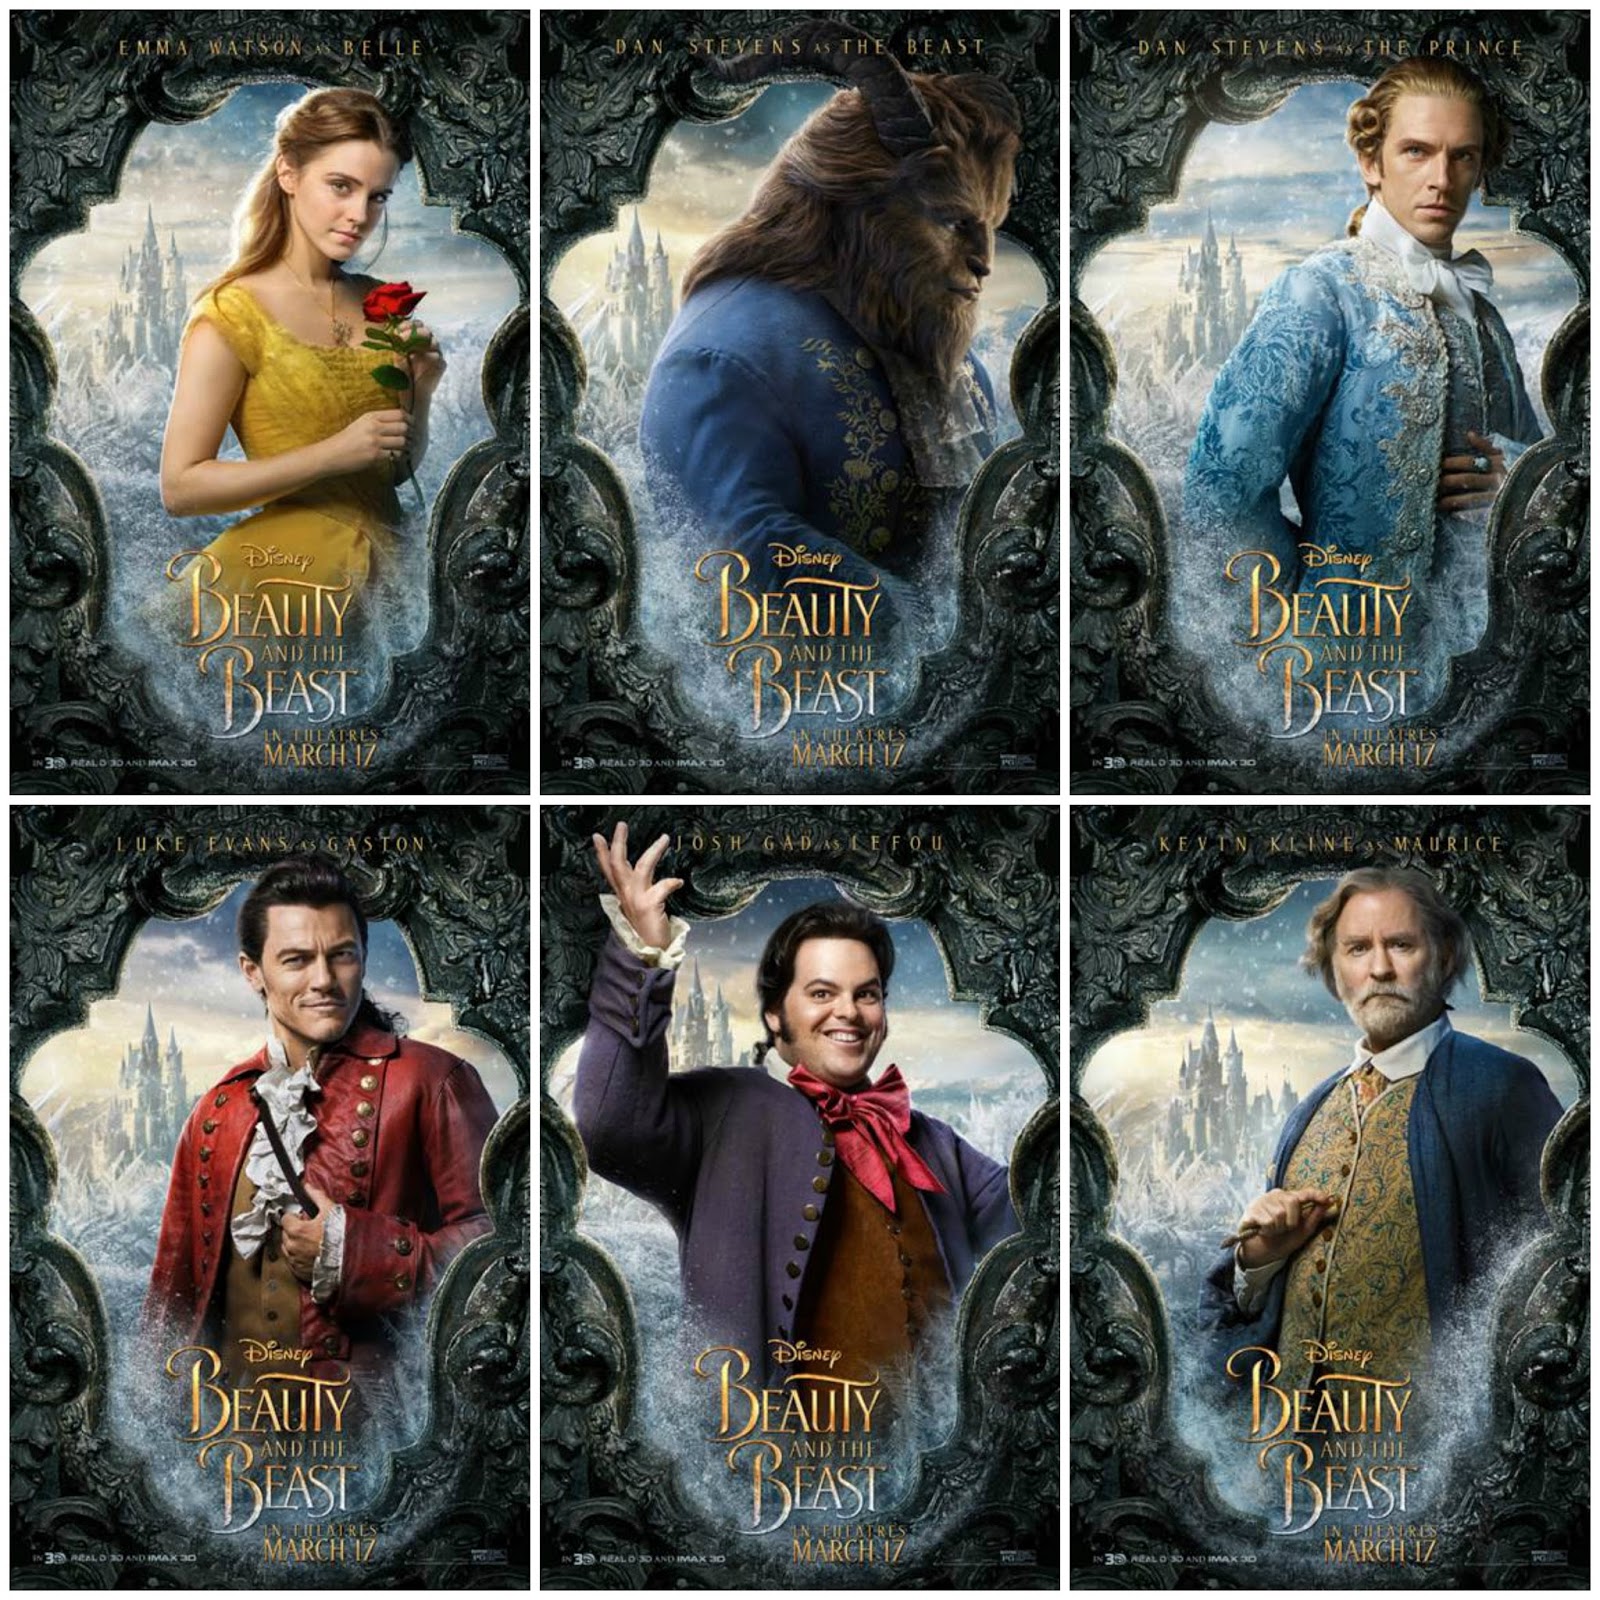 woven-by-words-beauty-and-the-beast-posters-trailer